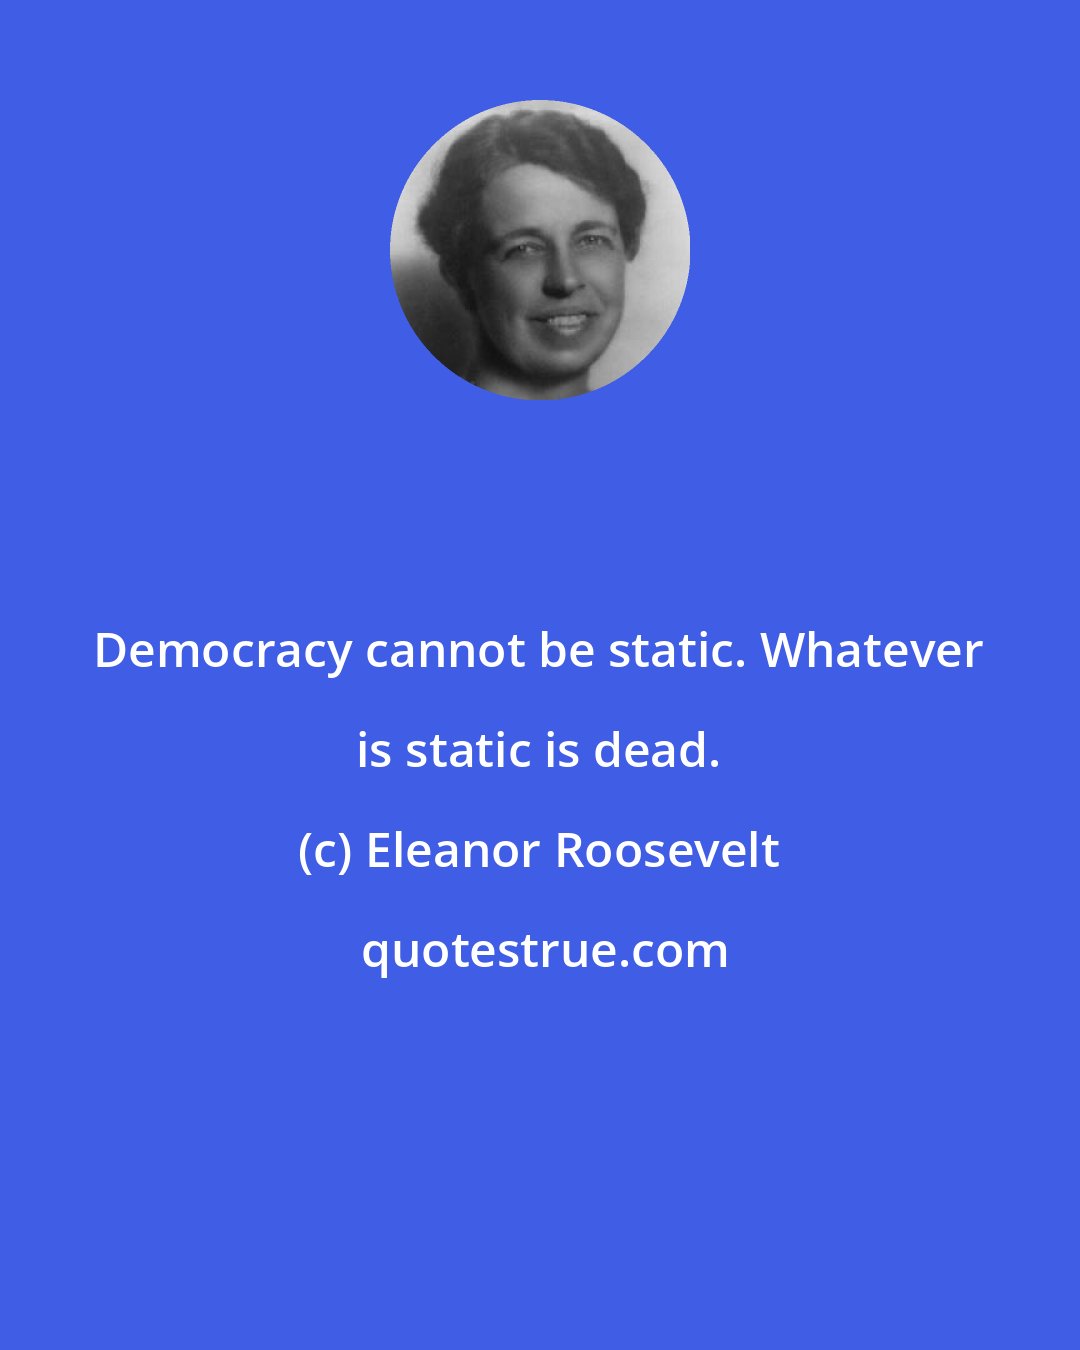 Eleanor Roosevelt: Democracy cannot be static. Whatever is static is dead.